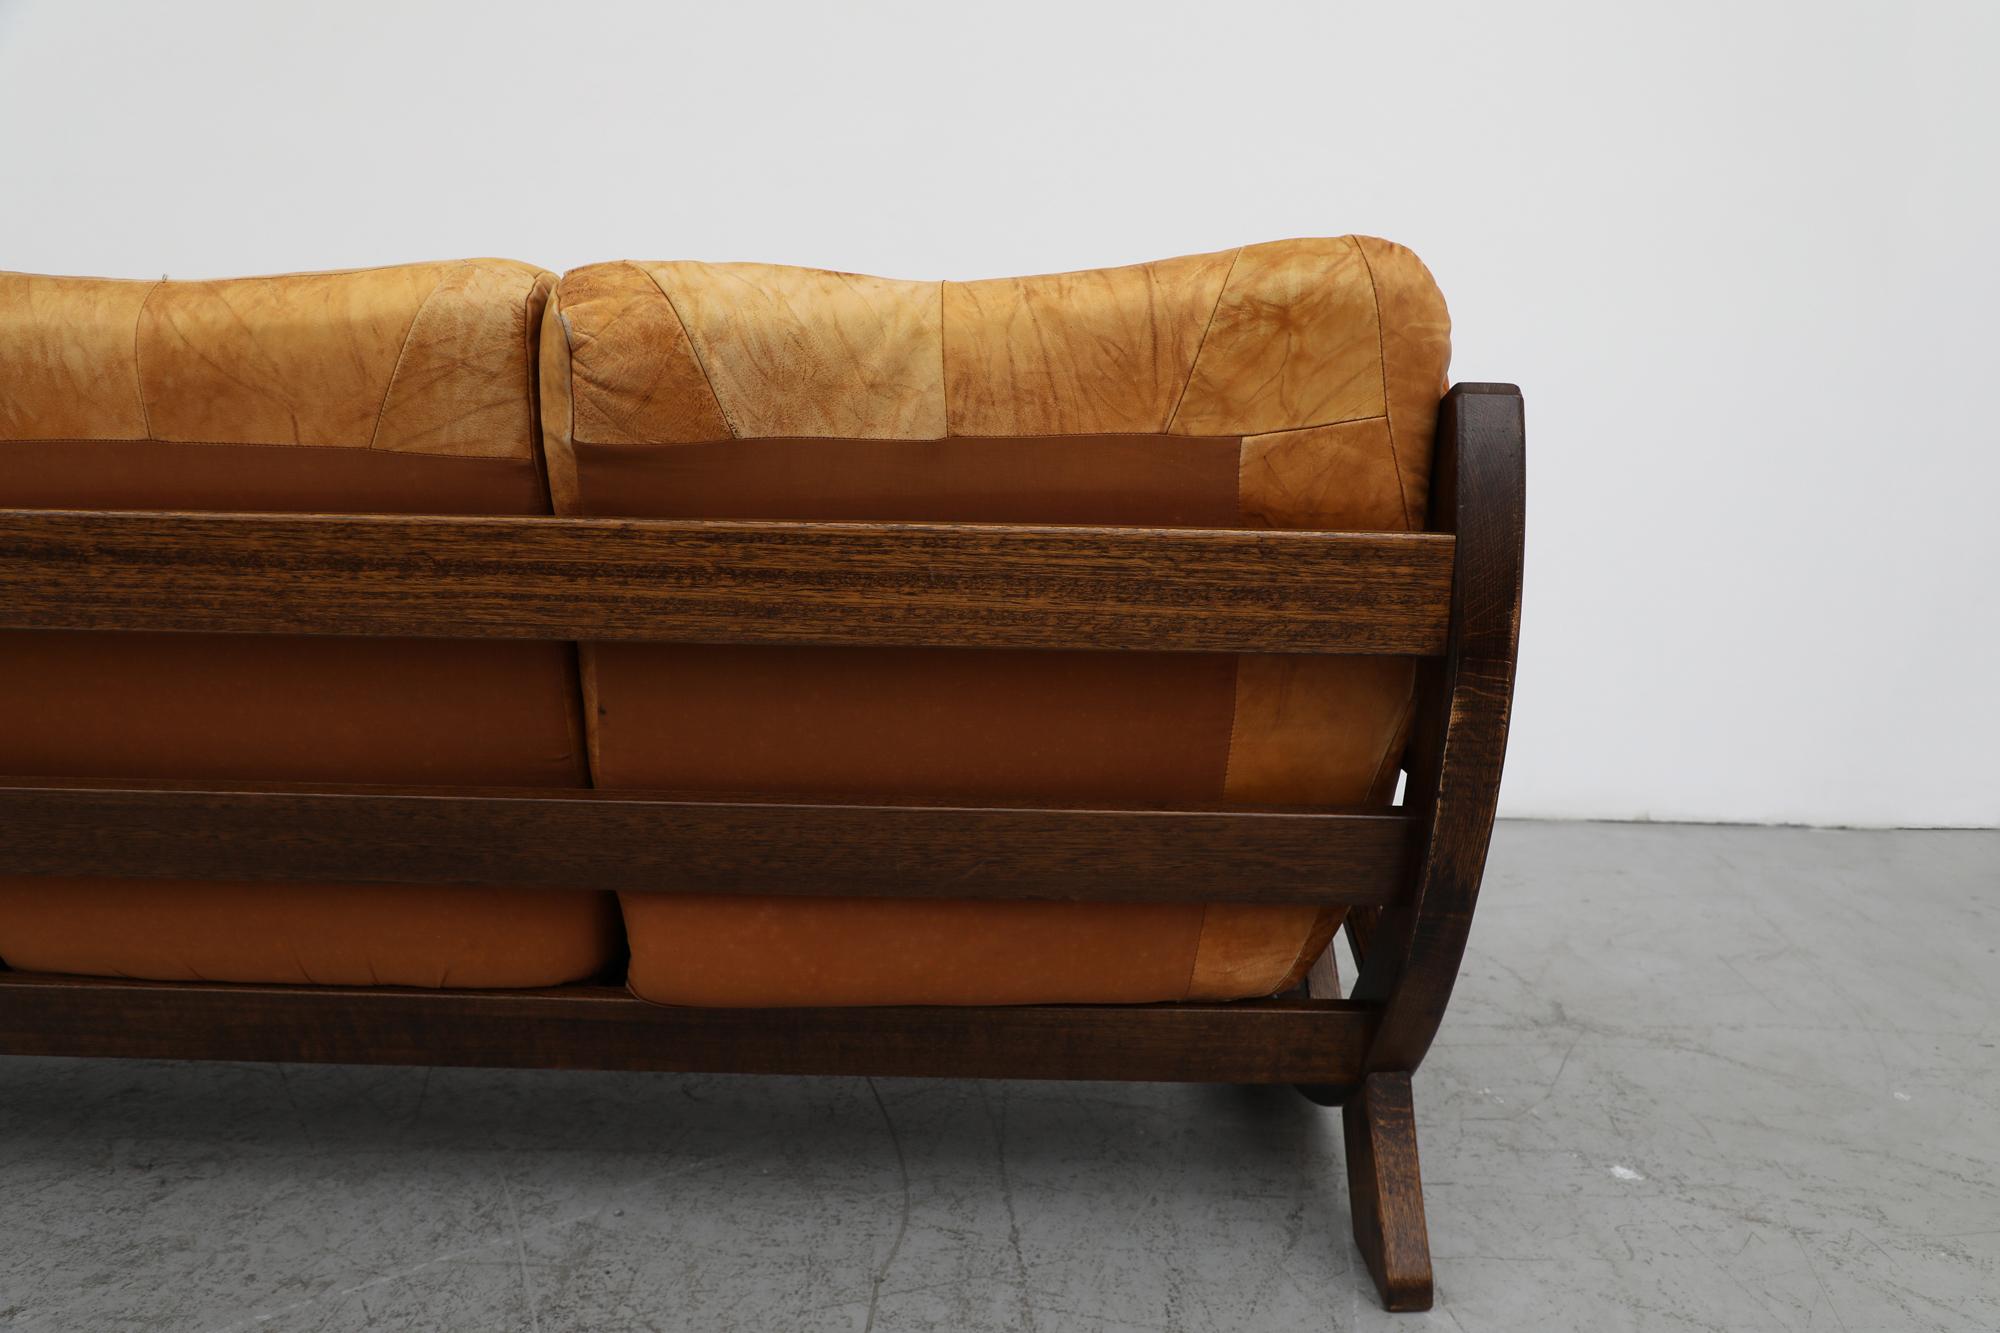 Late 20th Century Mid-Century Brutalist Brown Leather Patchwork Sofa with Western Style Wood Frame For Sale